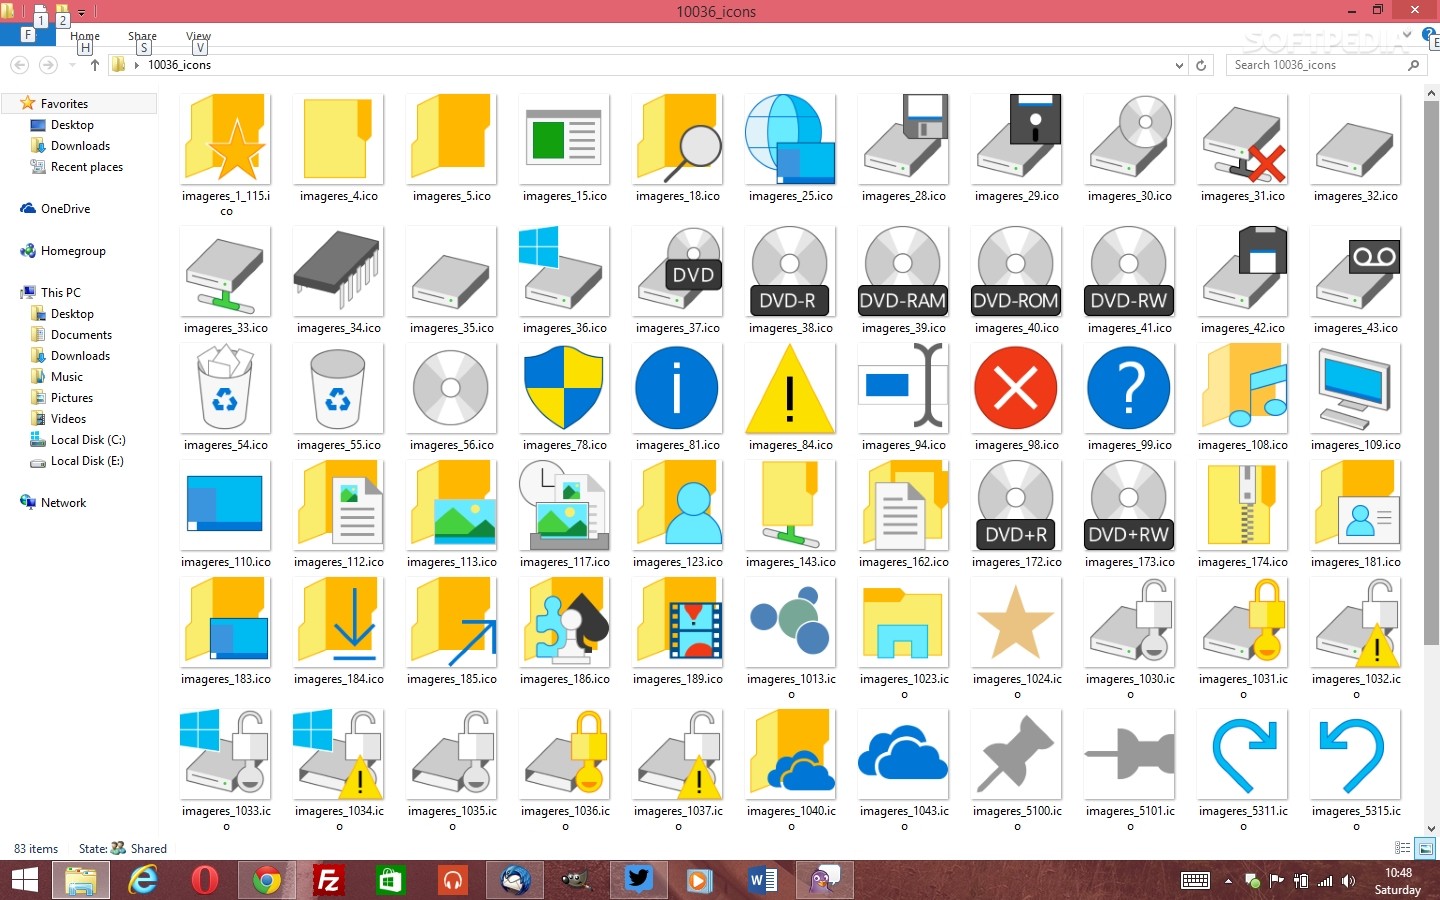 Download icons from Windows 10 build 10147